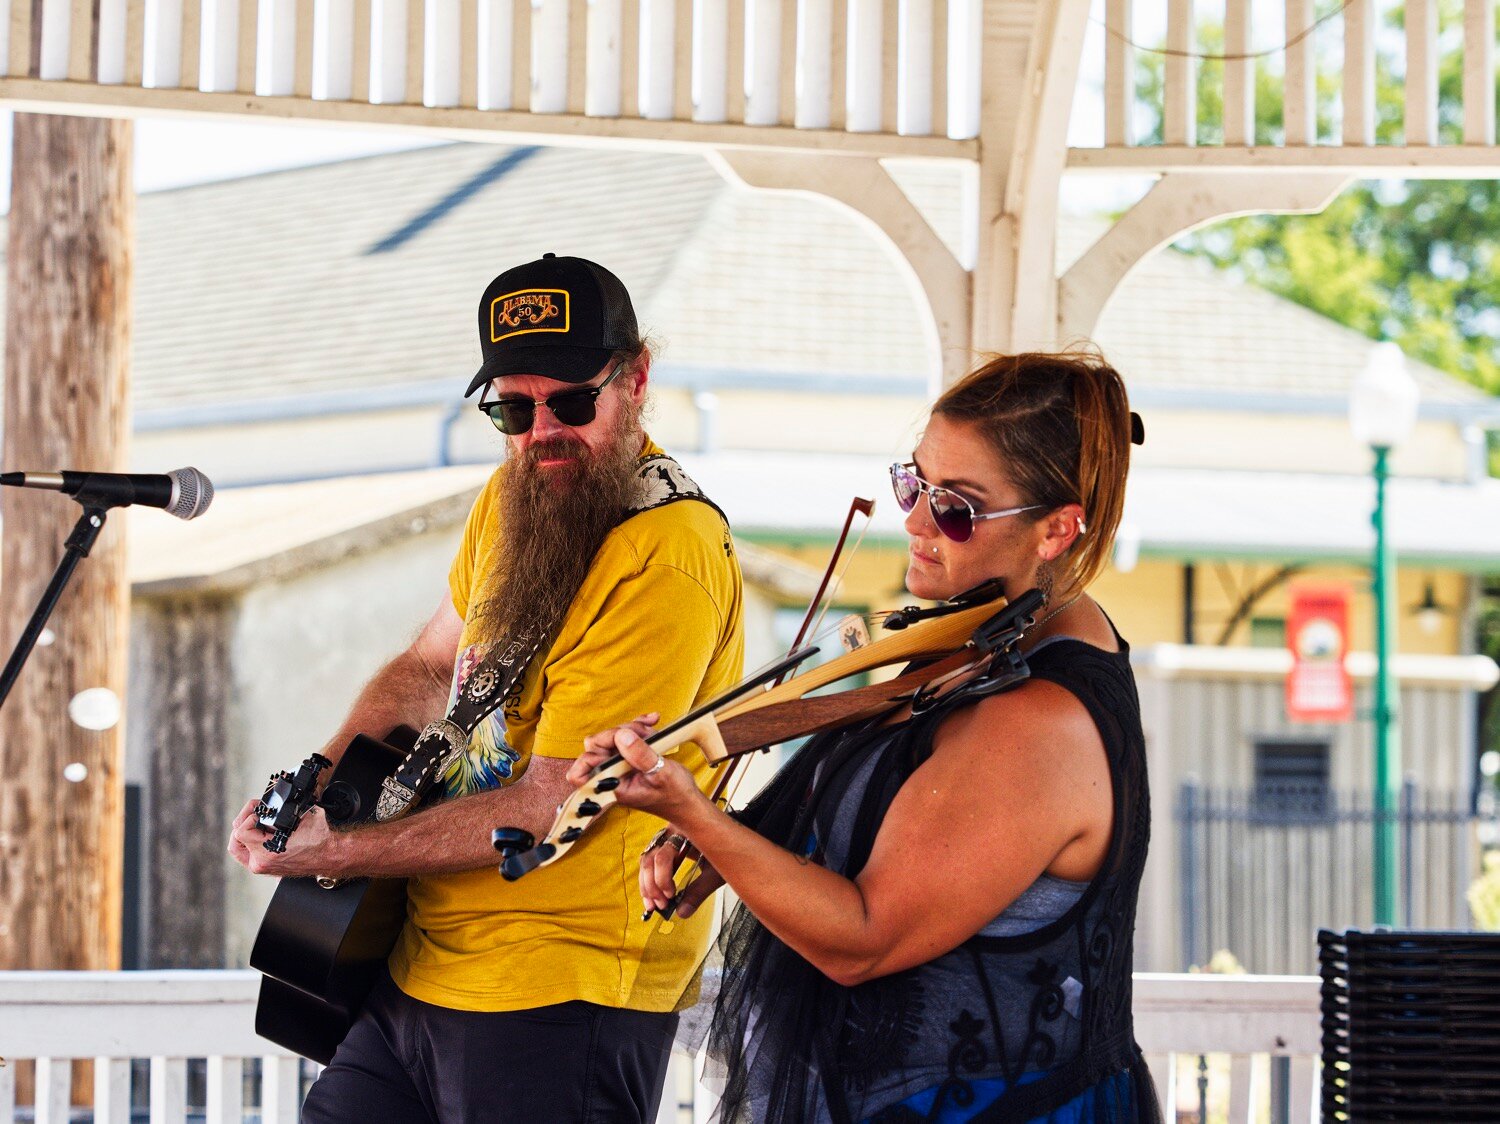 Lee Mathis and Sheila Weaver provide excellent musical entertainment under the gazebo on Commerce St. [additional iron horse images available]